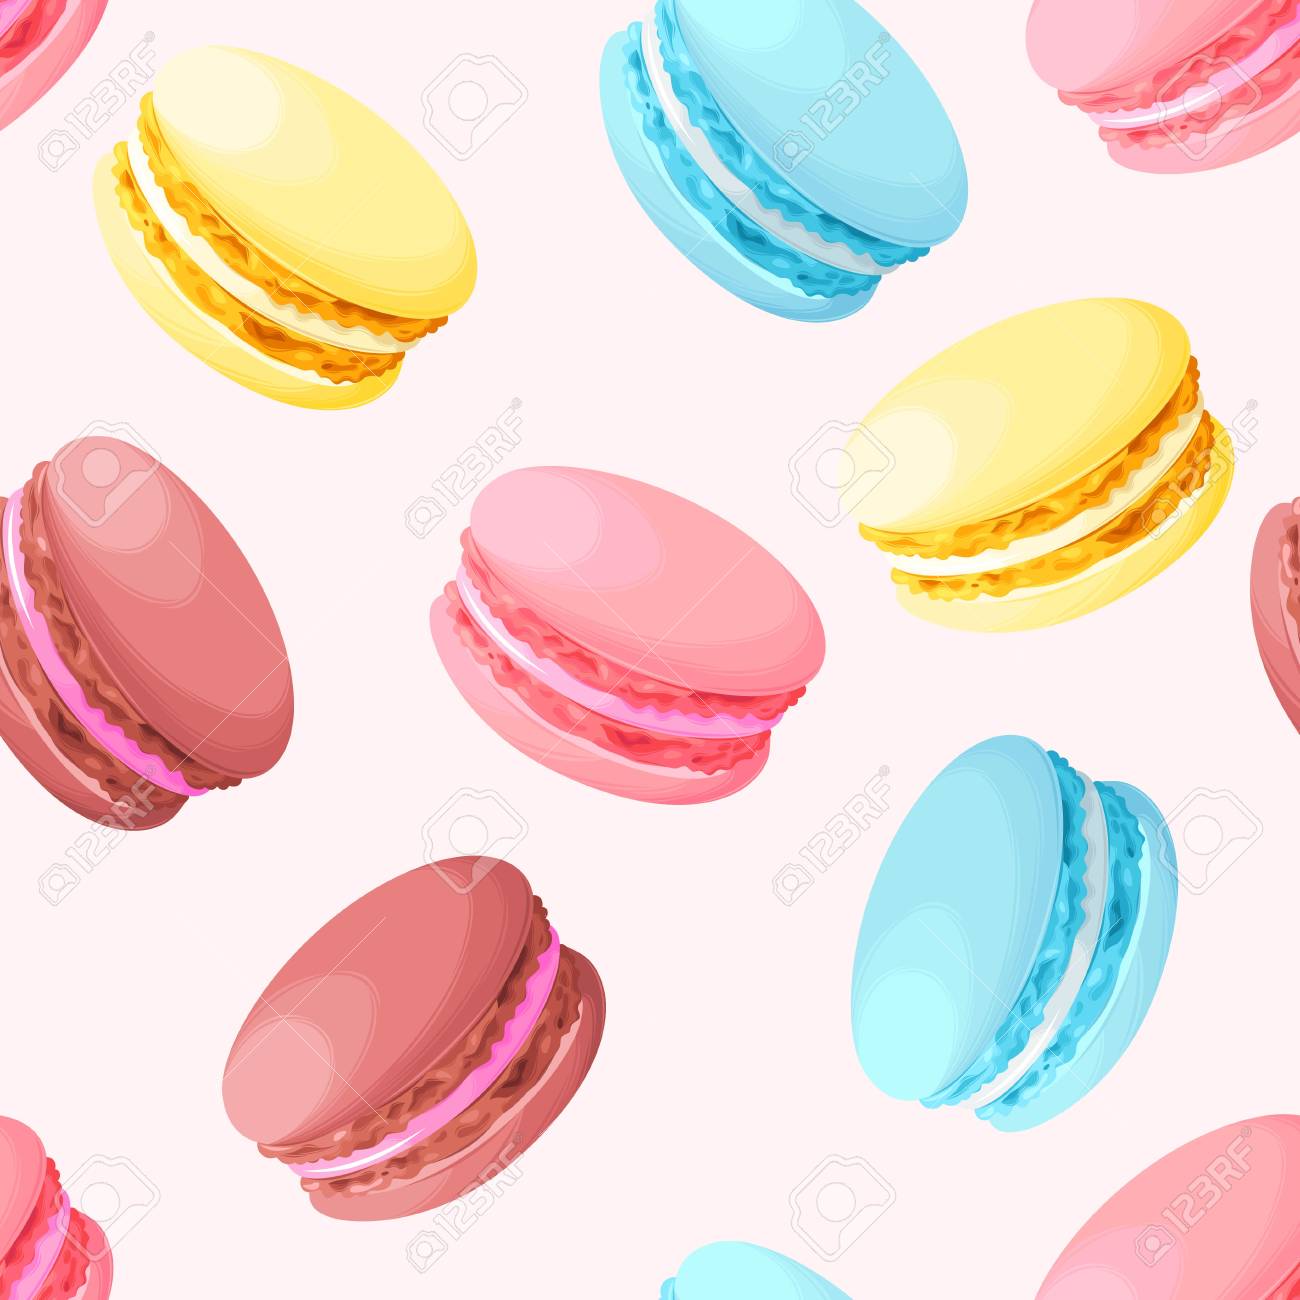 Pastel Cute Macarons Vintage Vector Seamless Background Royalty